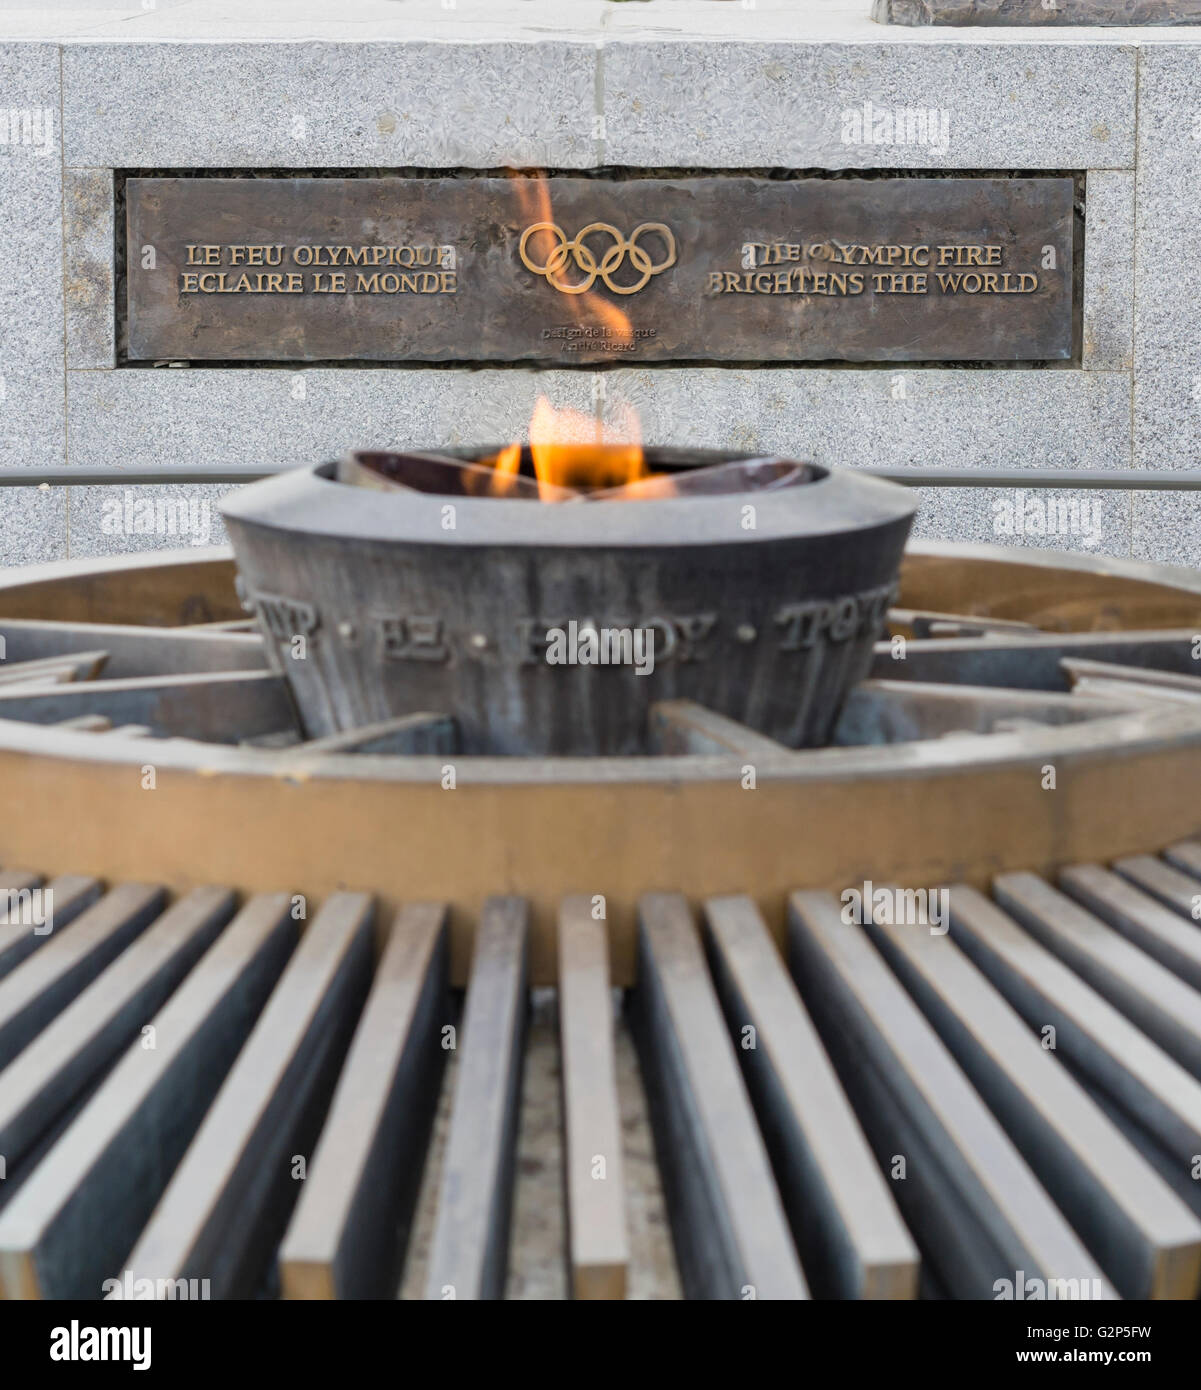 All 97+ Images how long has the eternal flame been burning Excellent